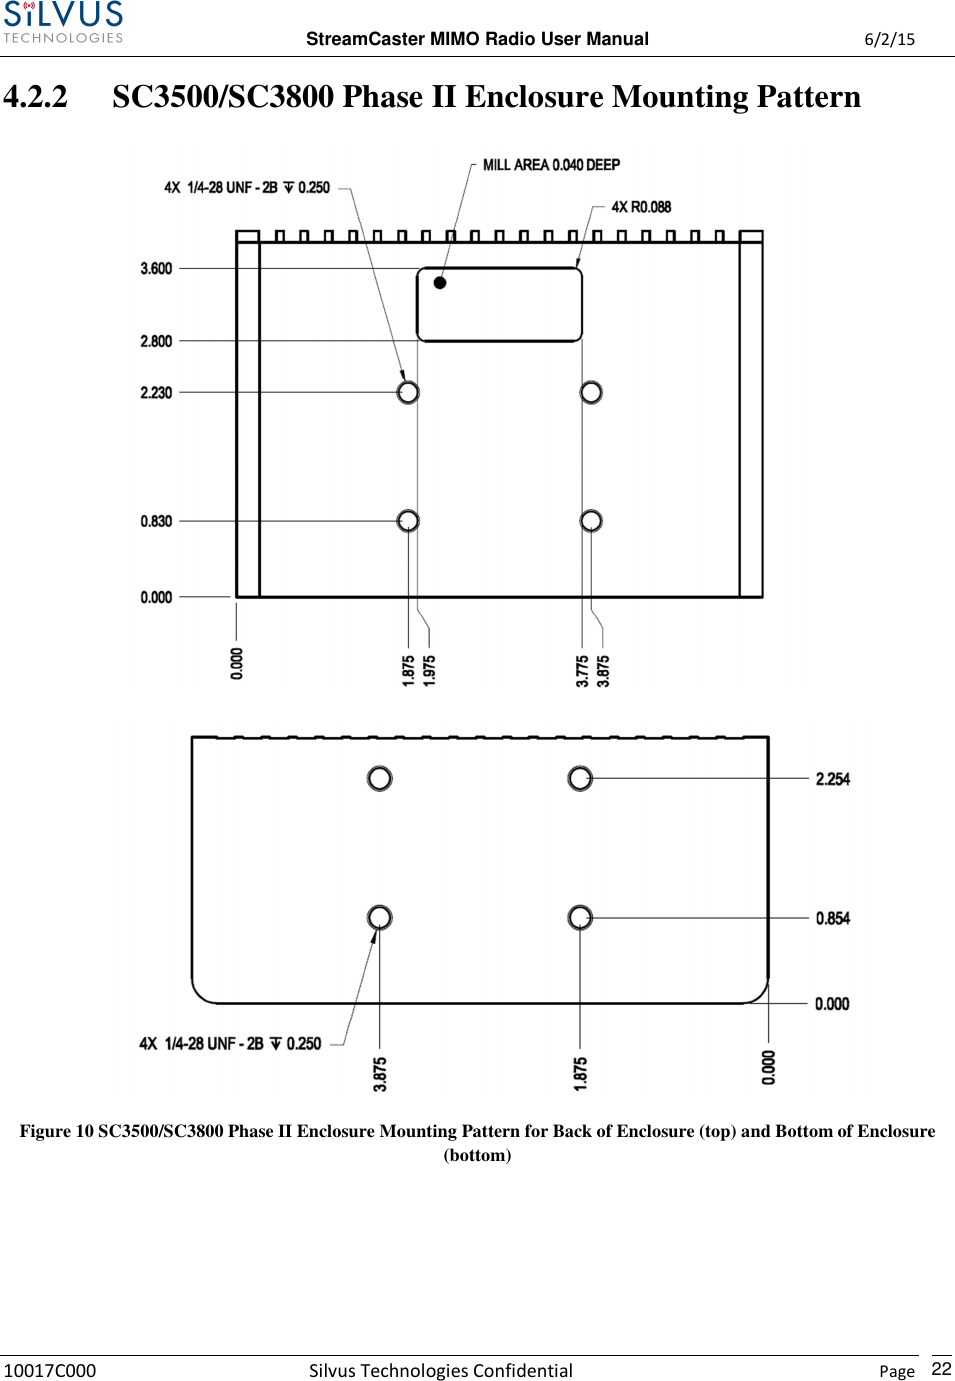  StreamCaster MIMO Radio User Manual  6/2/15 10017C000 Silvus Technologies Confidential    Page   22 4.2.2 SC3500/SC3800 Phase II Enclosure Mounting Pattern   Figure 10 SC3500/SC3800 Phase II Enclosure Mounting Pattern for Back of Enclosure (top) and Bottom of Enclosure (bottom)  